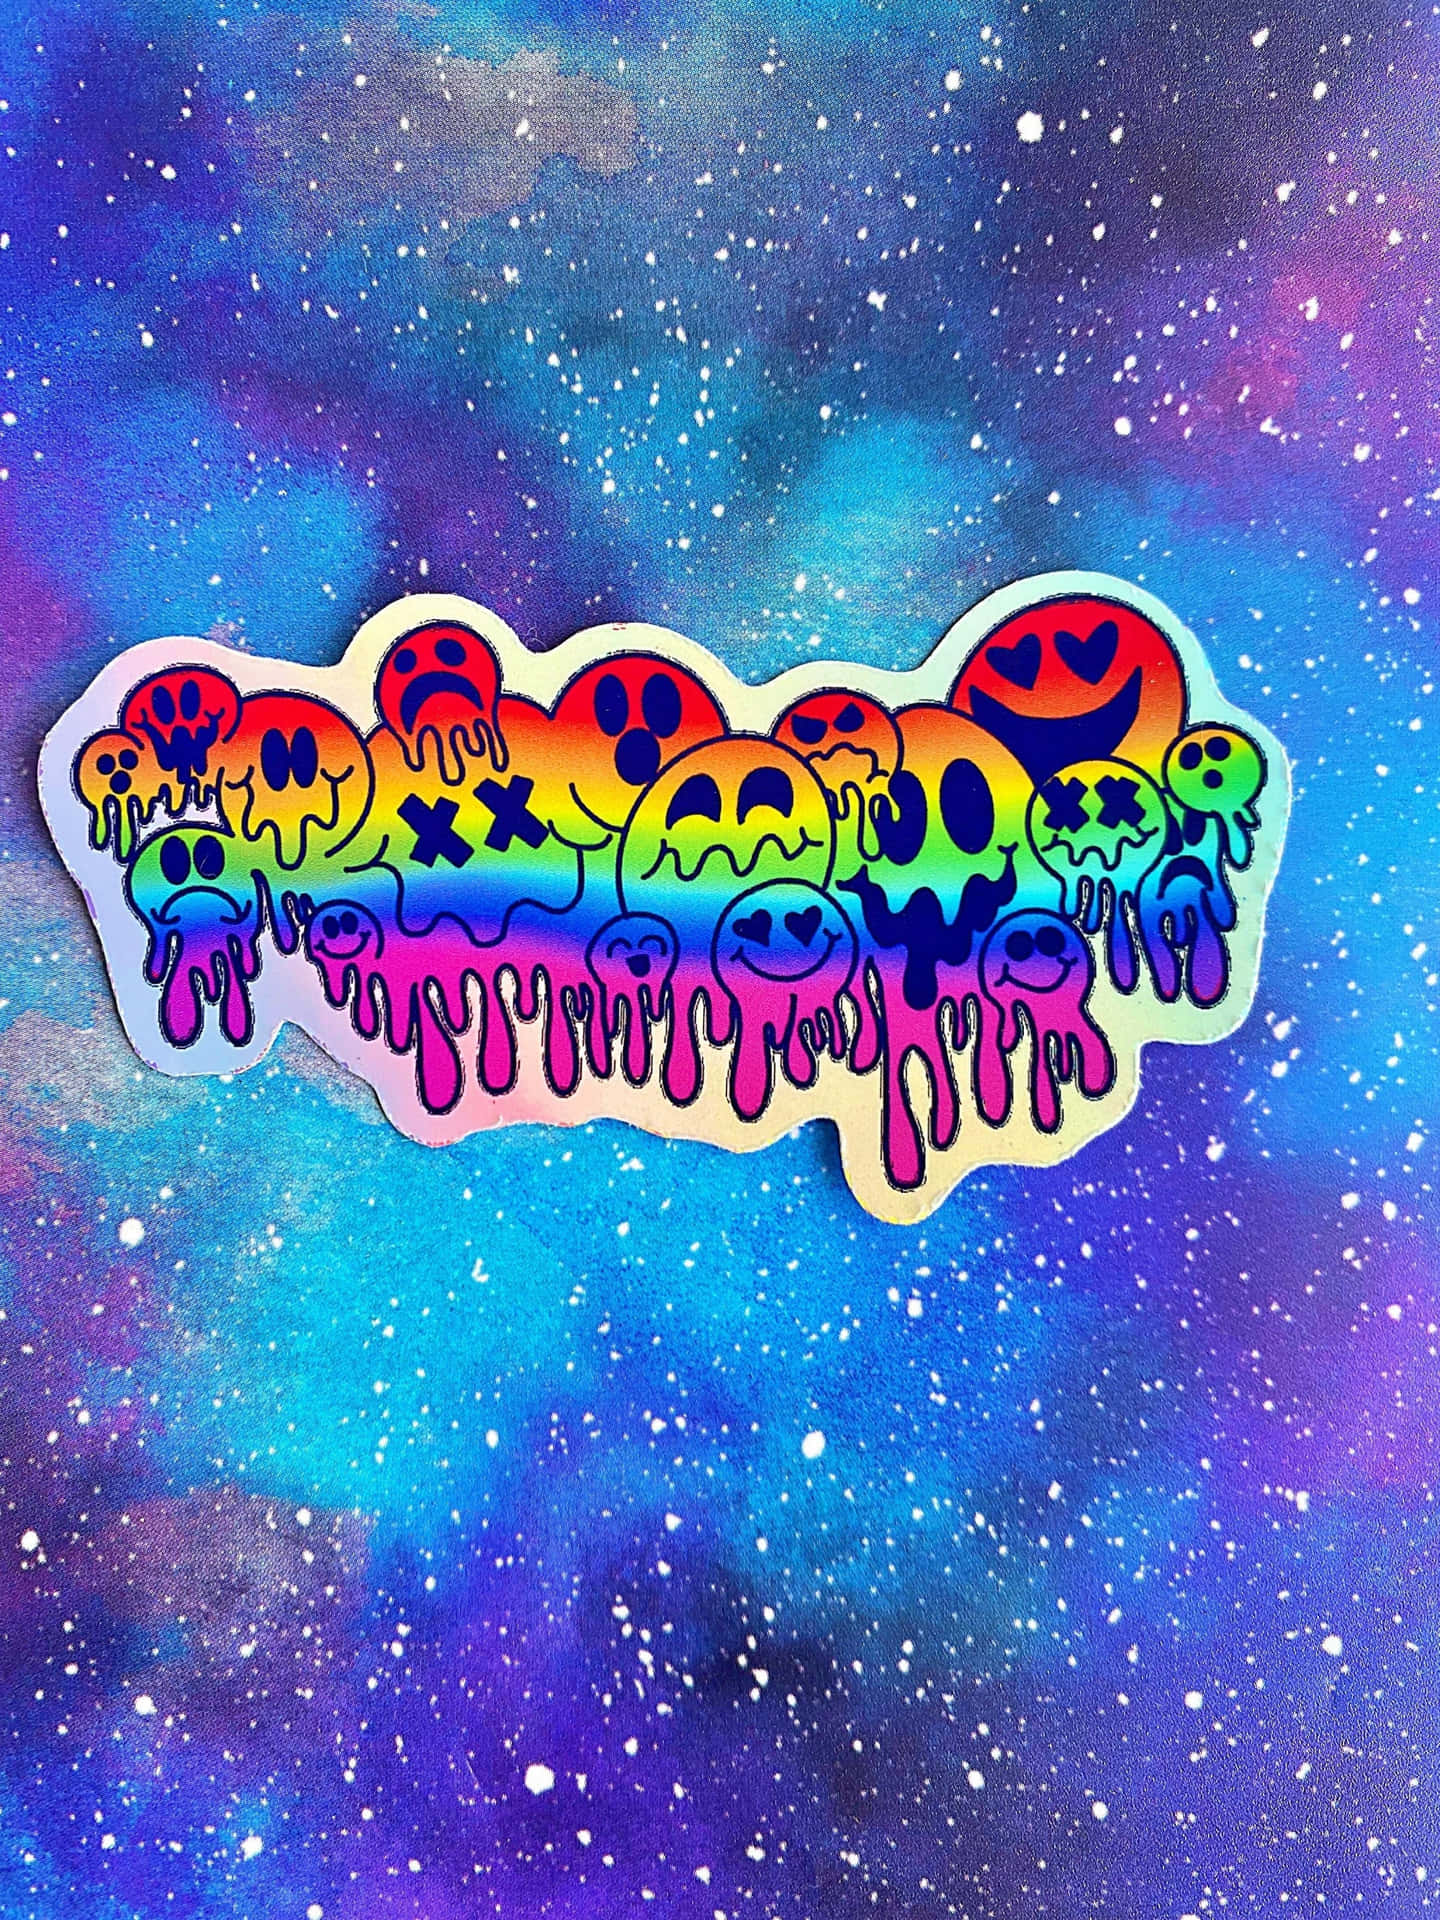 Holographic Sticker Aesthetic Trippy Smiley Face Wallpaper